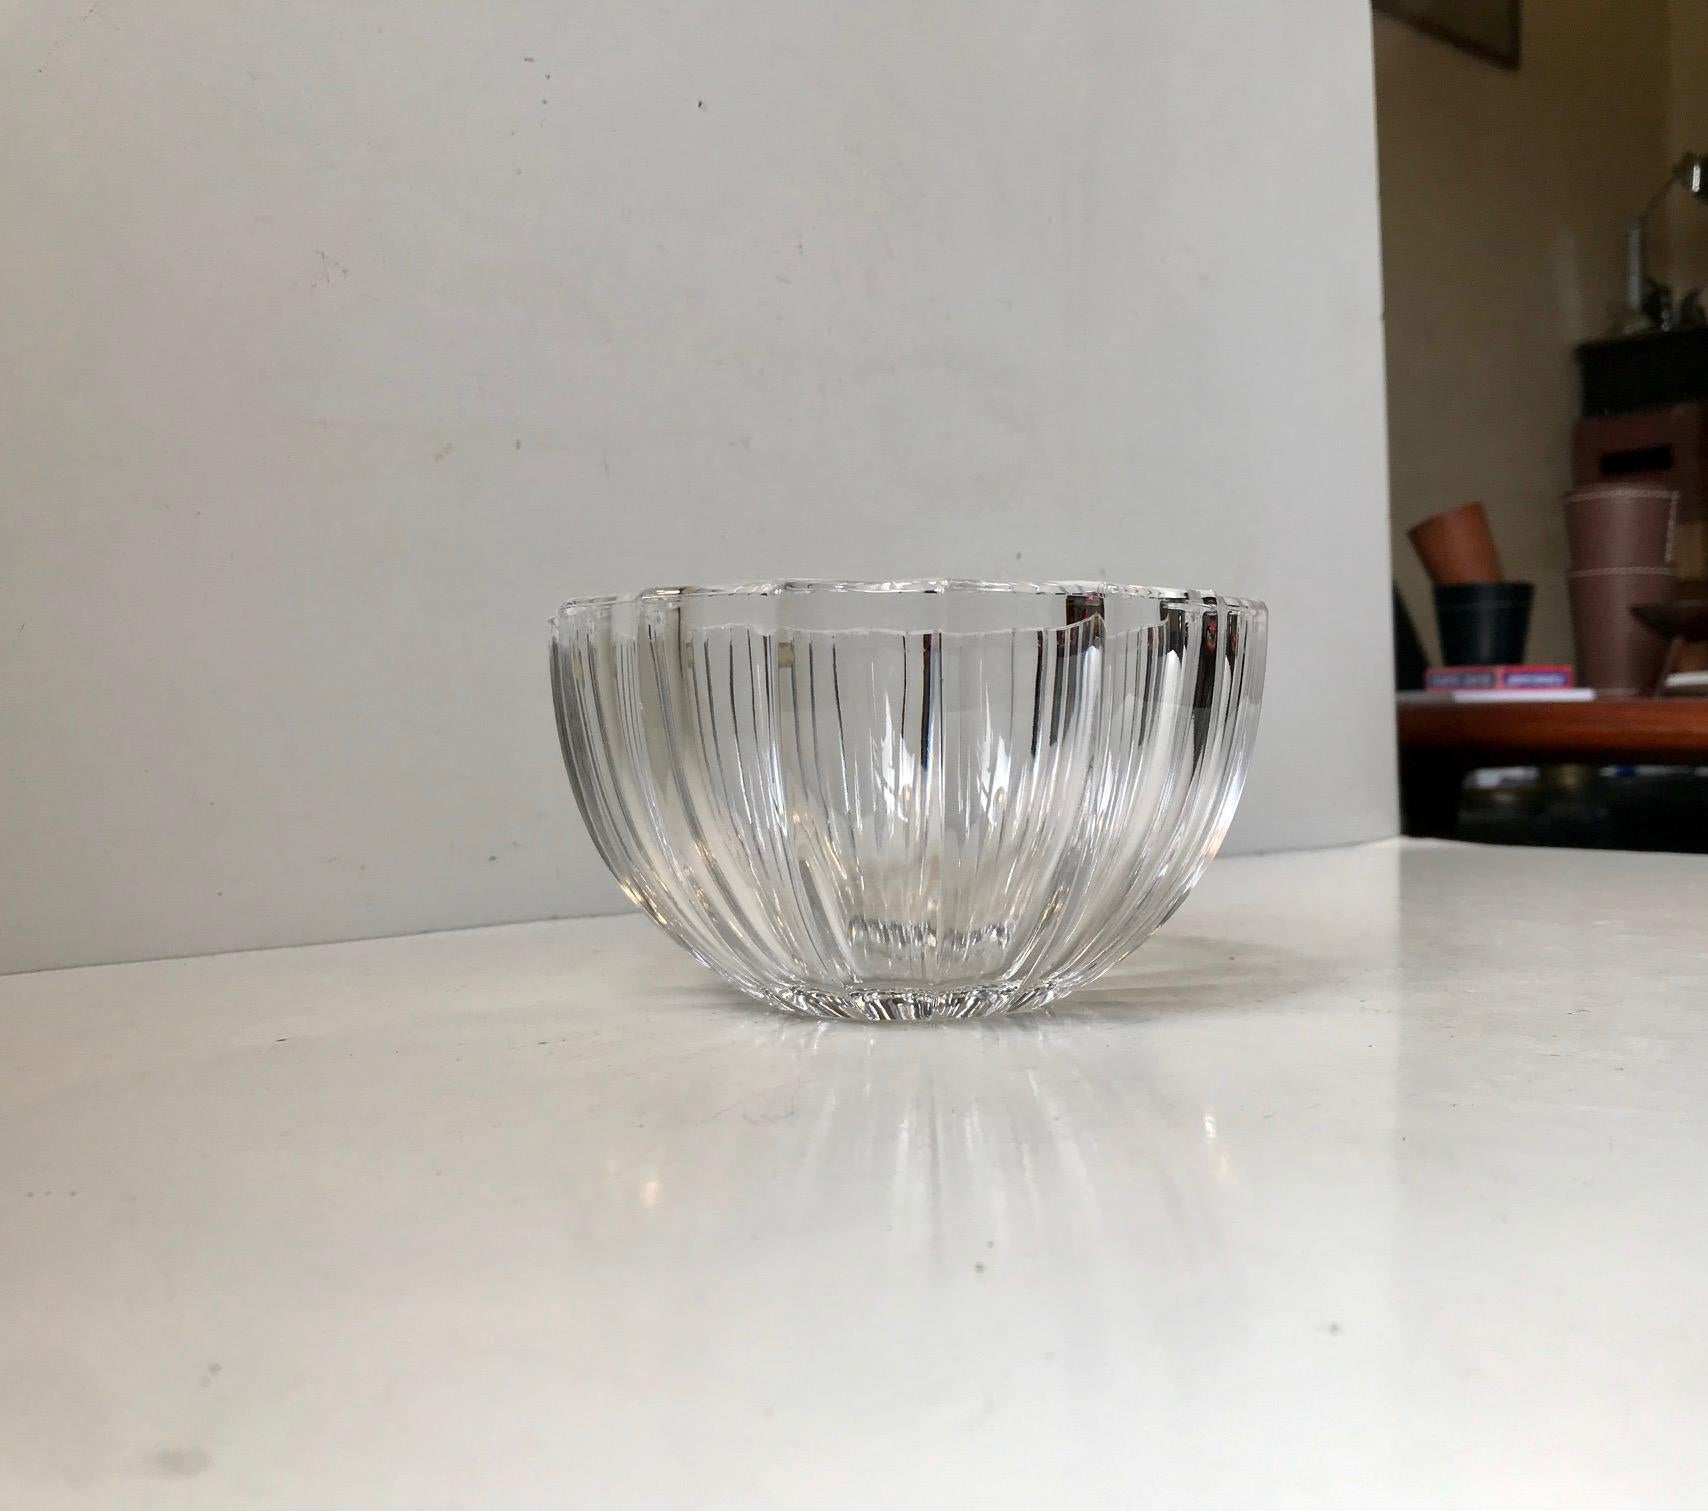 Based upon an Art Deco design from the 1940s this full lead clear crystal bowl from Kosta Boda in Sweden tics all the right boxes when it comes to Art Deco styling. The particular example was made circa 1970. The bowl retains its original sticker